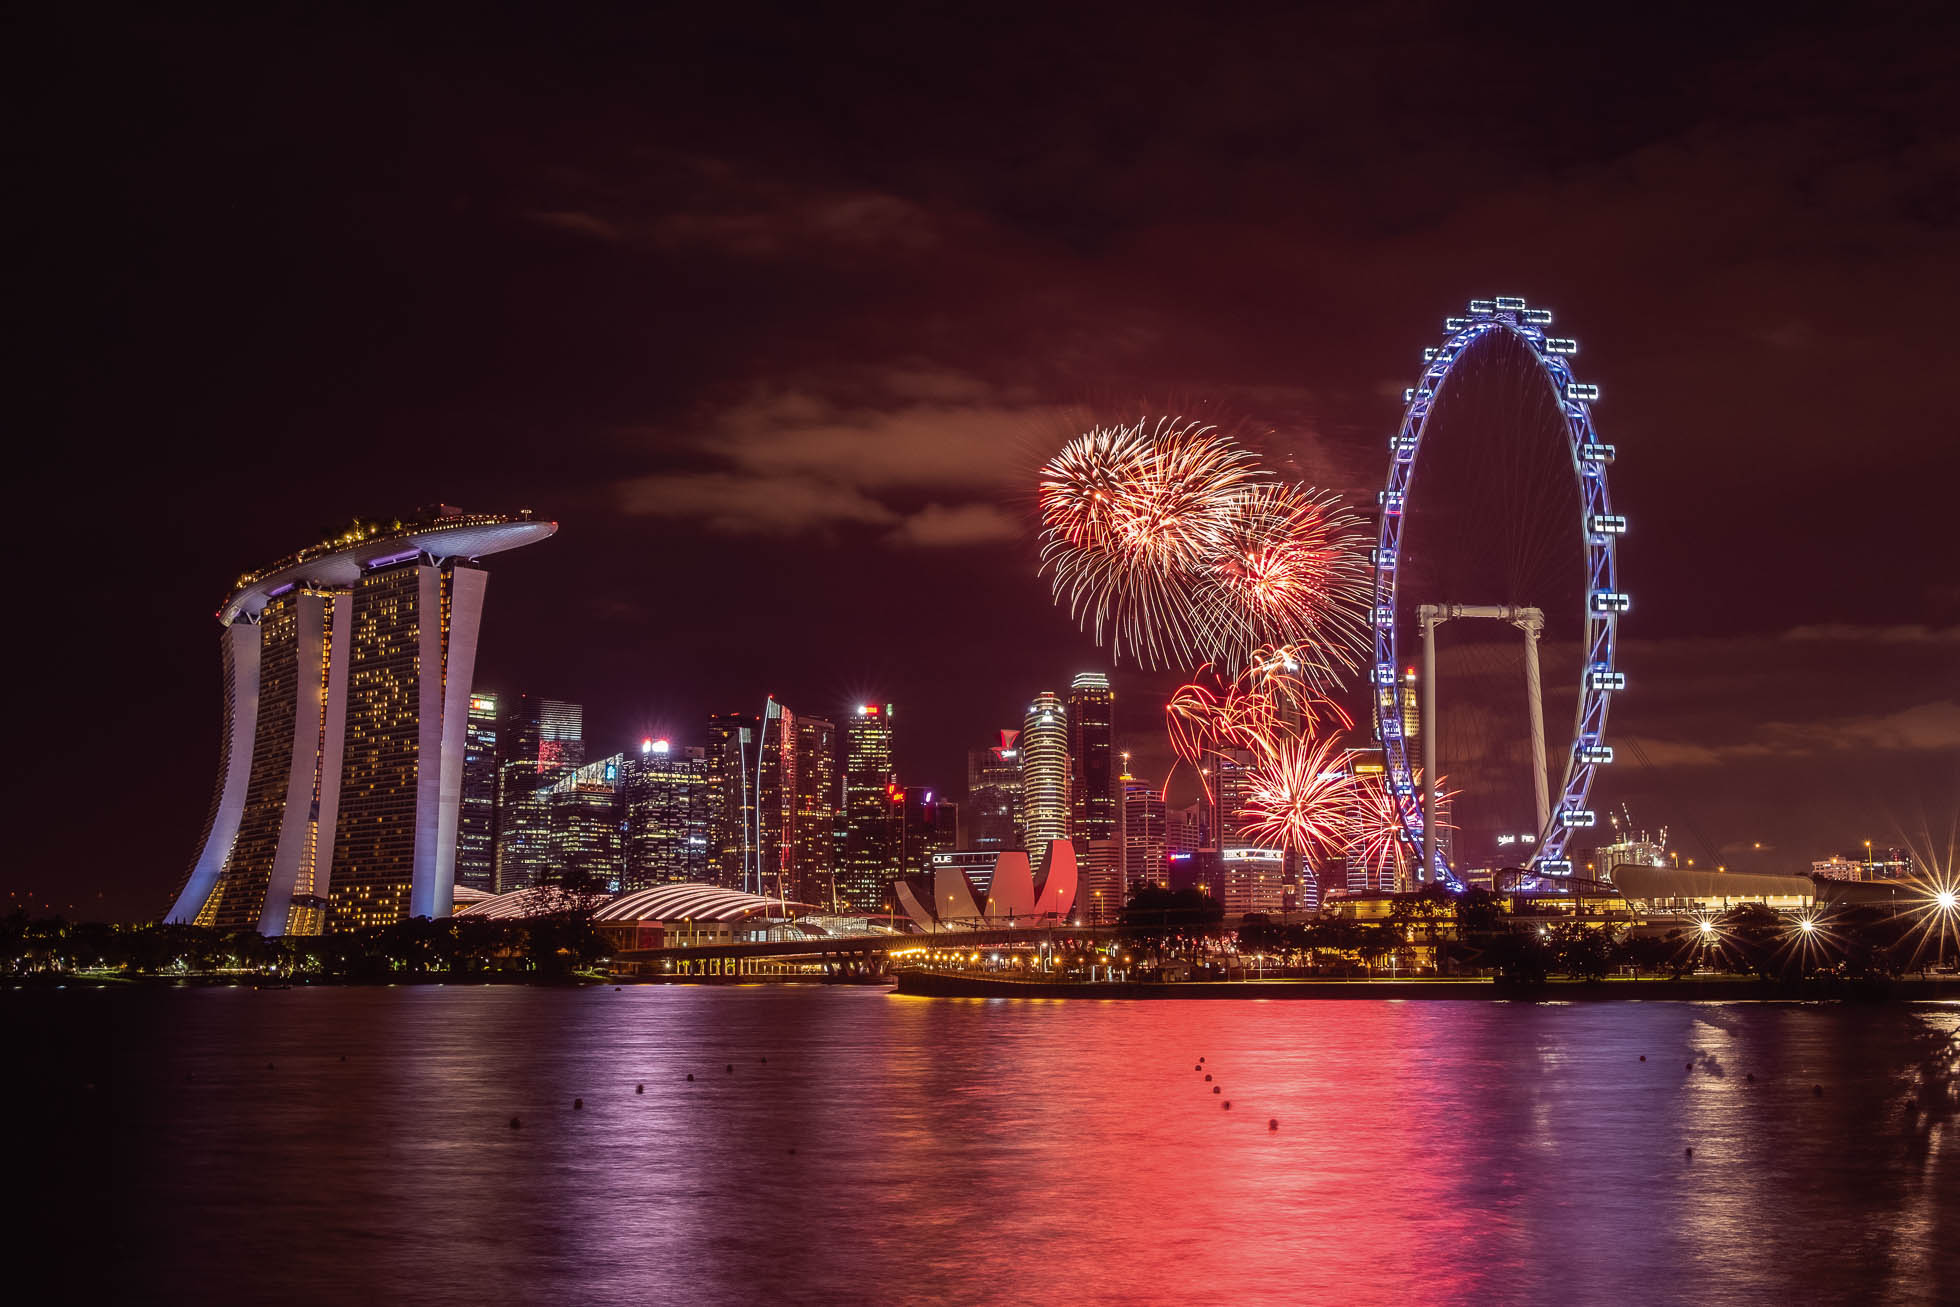 The ultimate guide to photographing fireworks like a pro